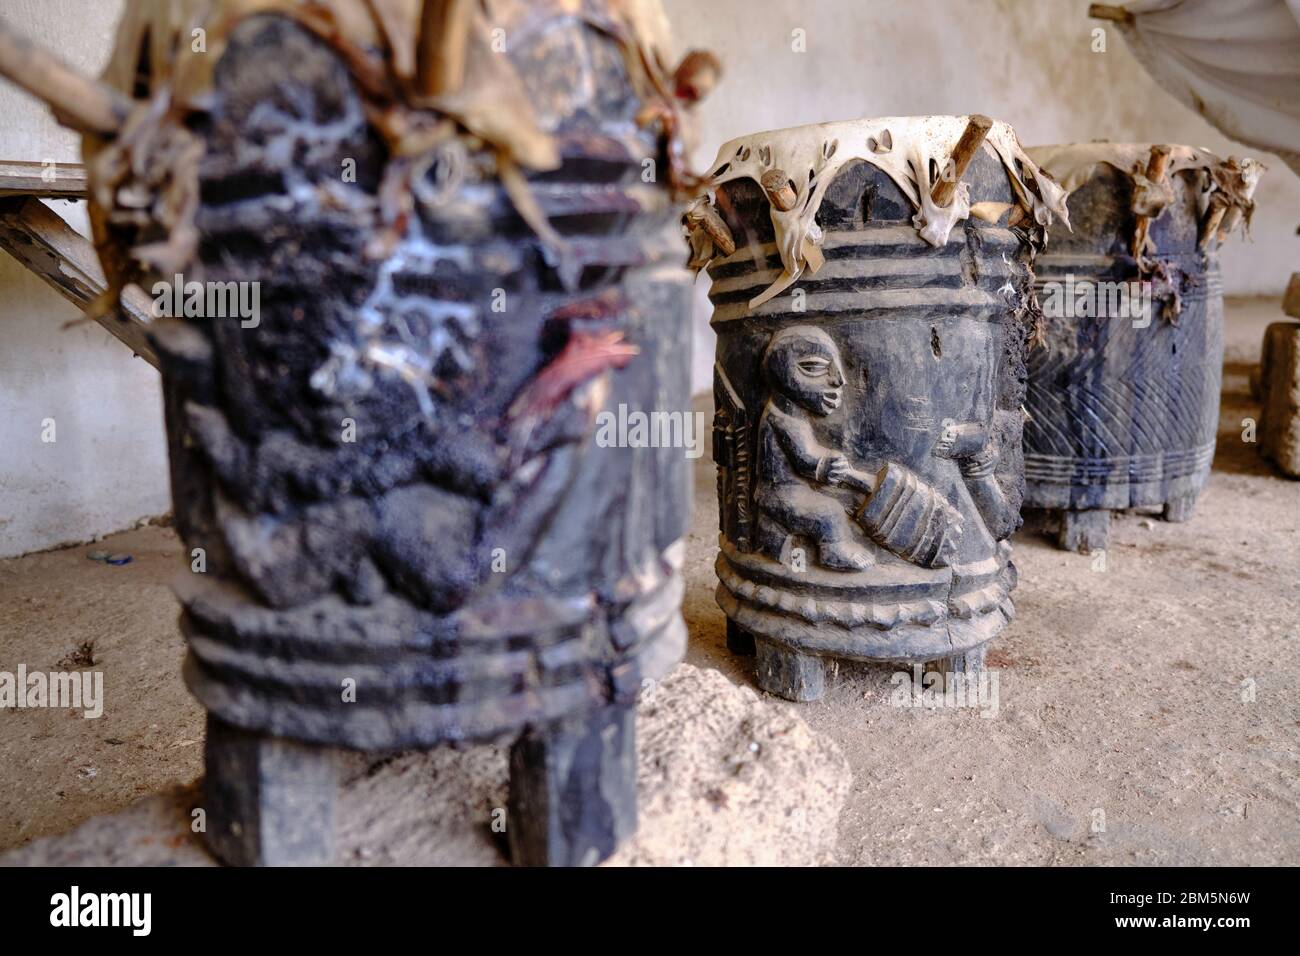 Sacred drums used for sacrifice rituals in the Yoruba religion Stock Photo  - Alamy